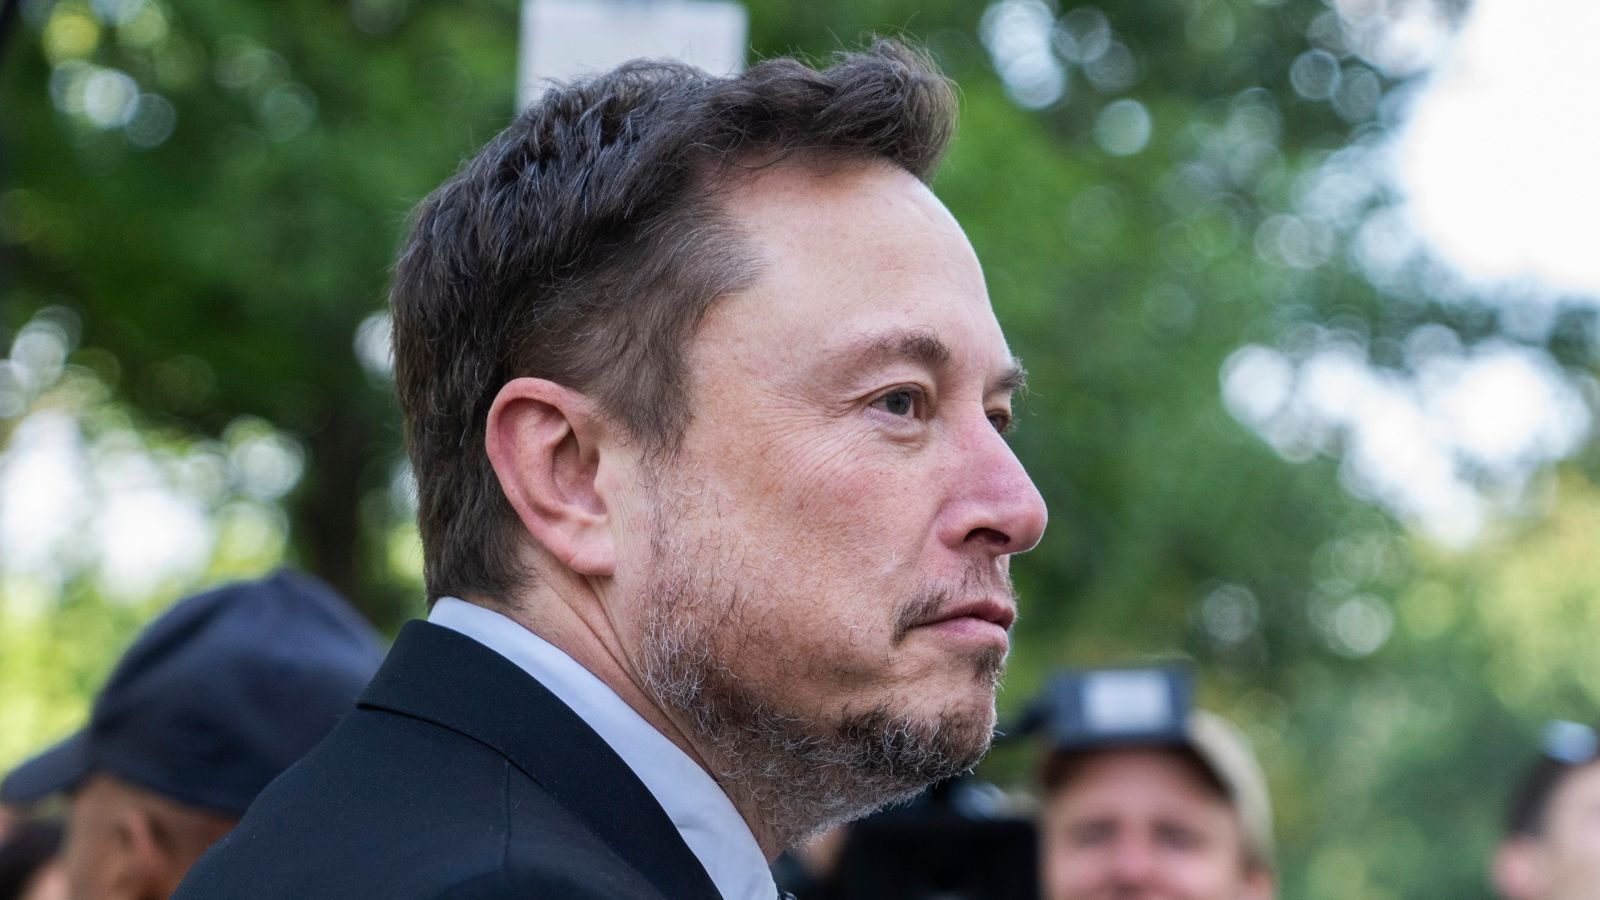 Elon Musk refuses to answer if his 'ignorance and ego' cost Ukrainian lives